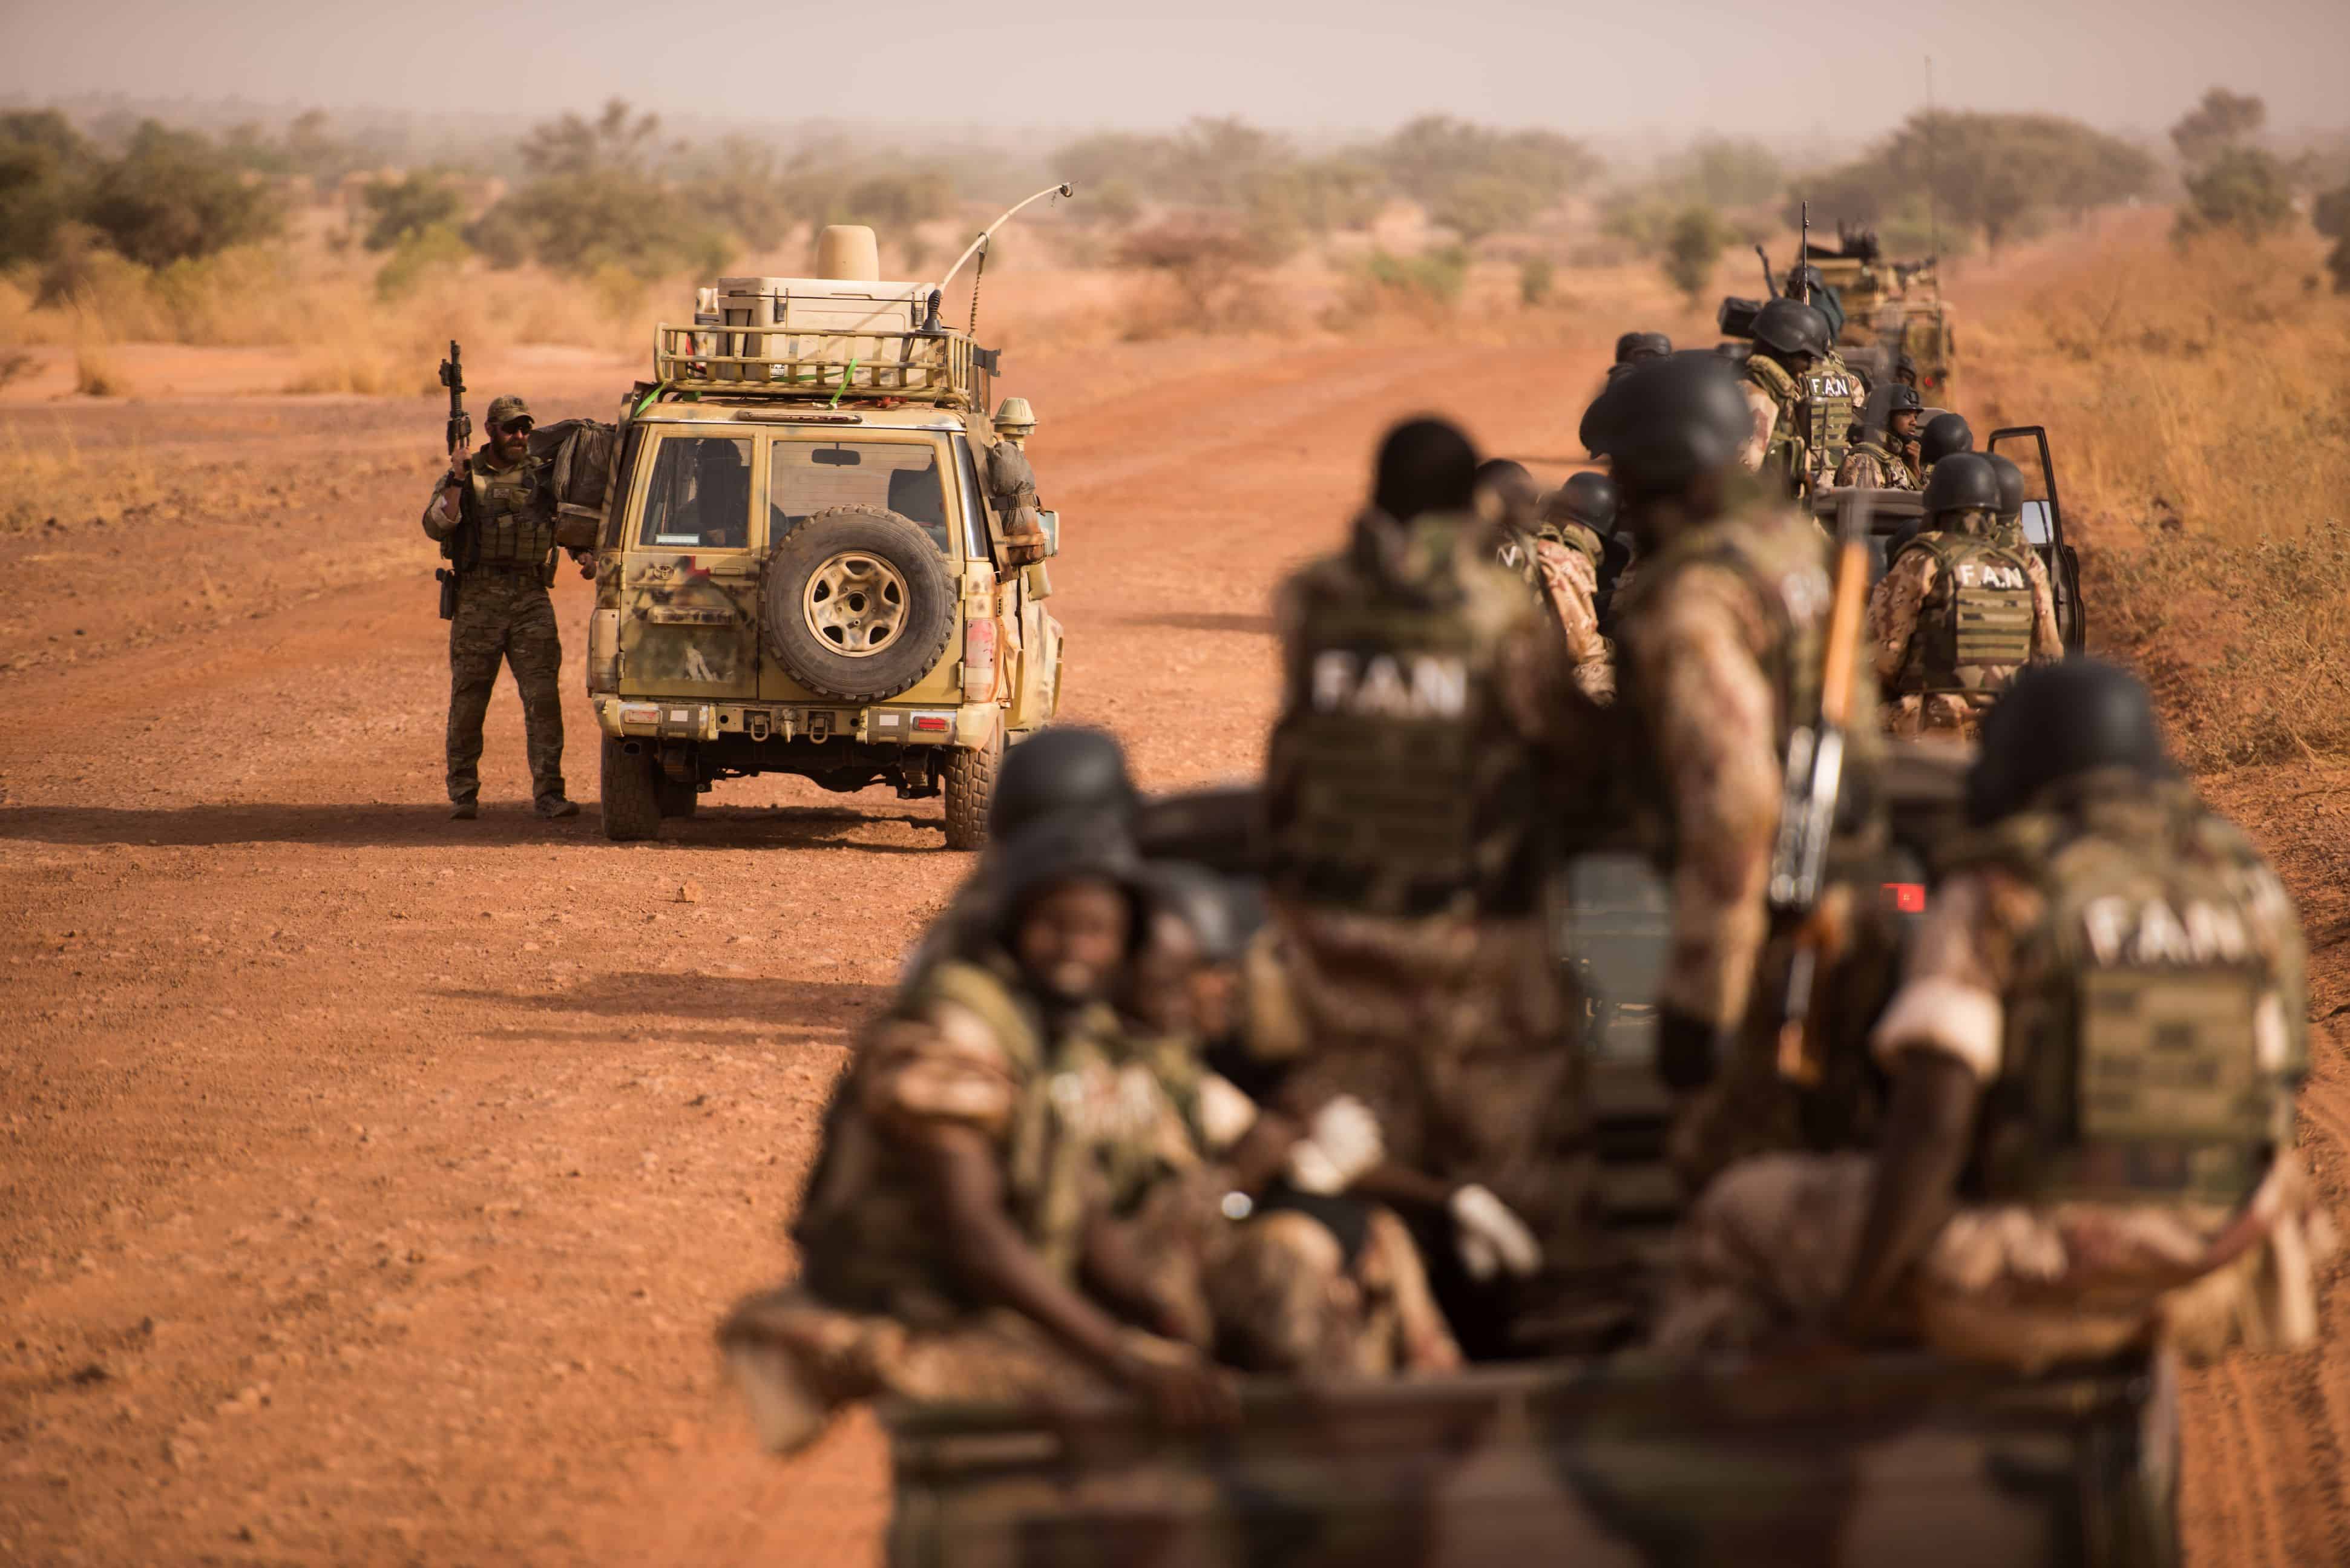 Nigerien Armed Forces conduct a convoy movement, key leader engagement and ambush exercise during Flintlock 18 in Niger, Africa April 15, 2018.